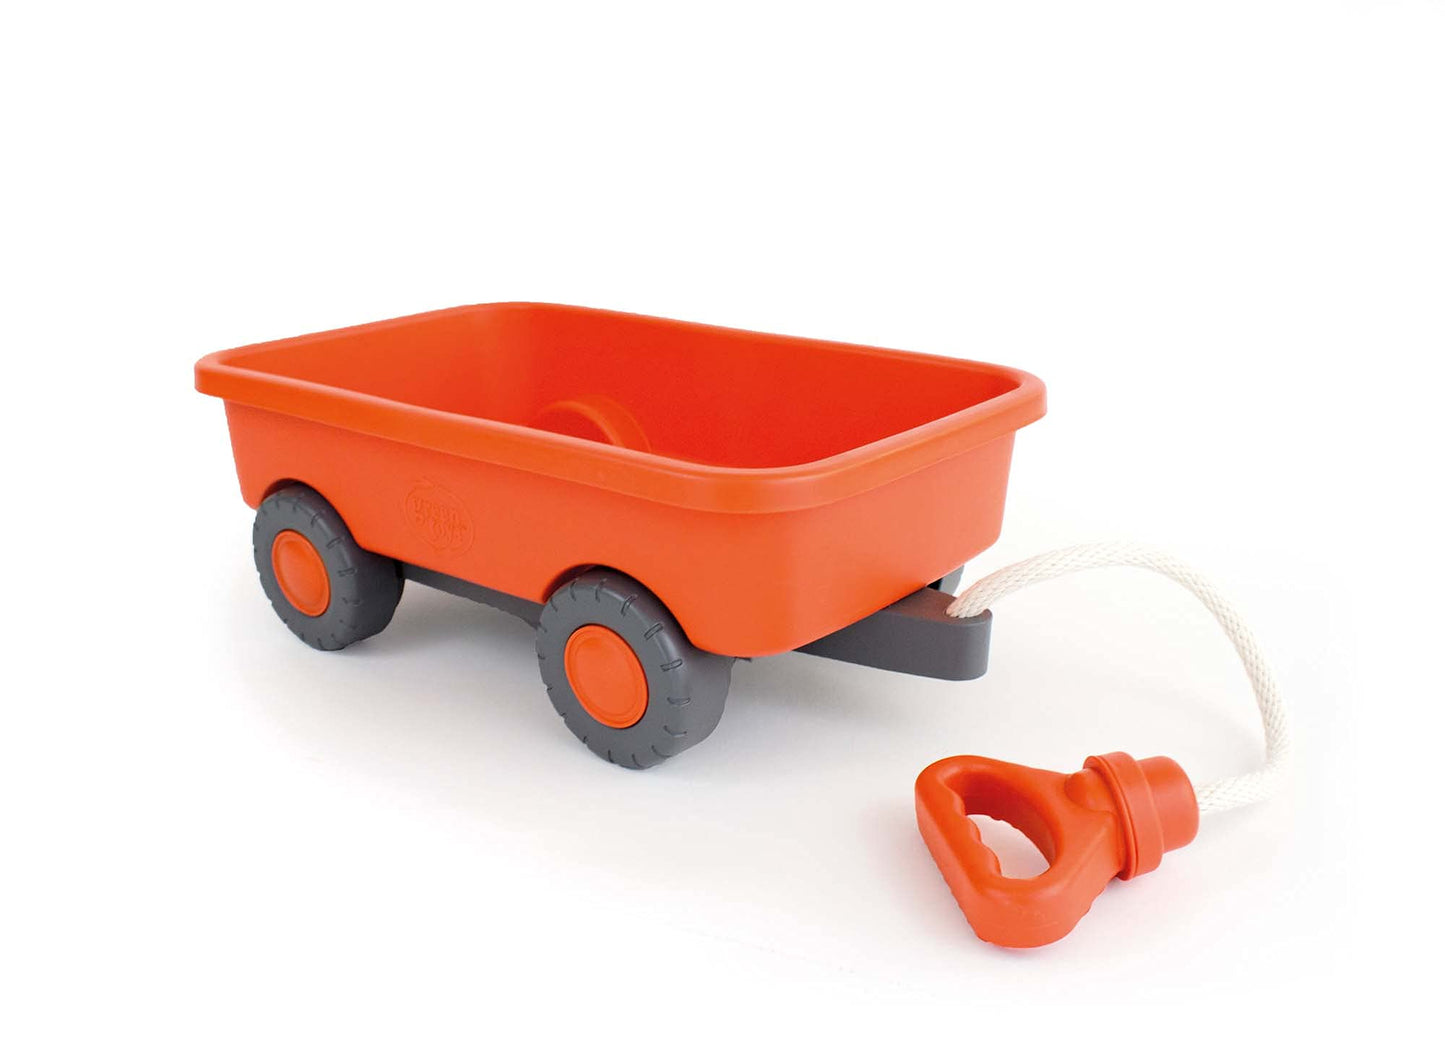 Orange - Pretend Play, Motor Skills, Kids Outdoor Toy Vehicle. No BPA, phthalates, PVC. Dishwasher Safe, Recycled Plastic, Made in USA.